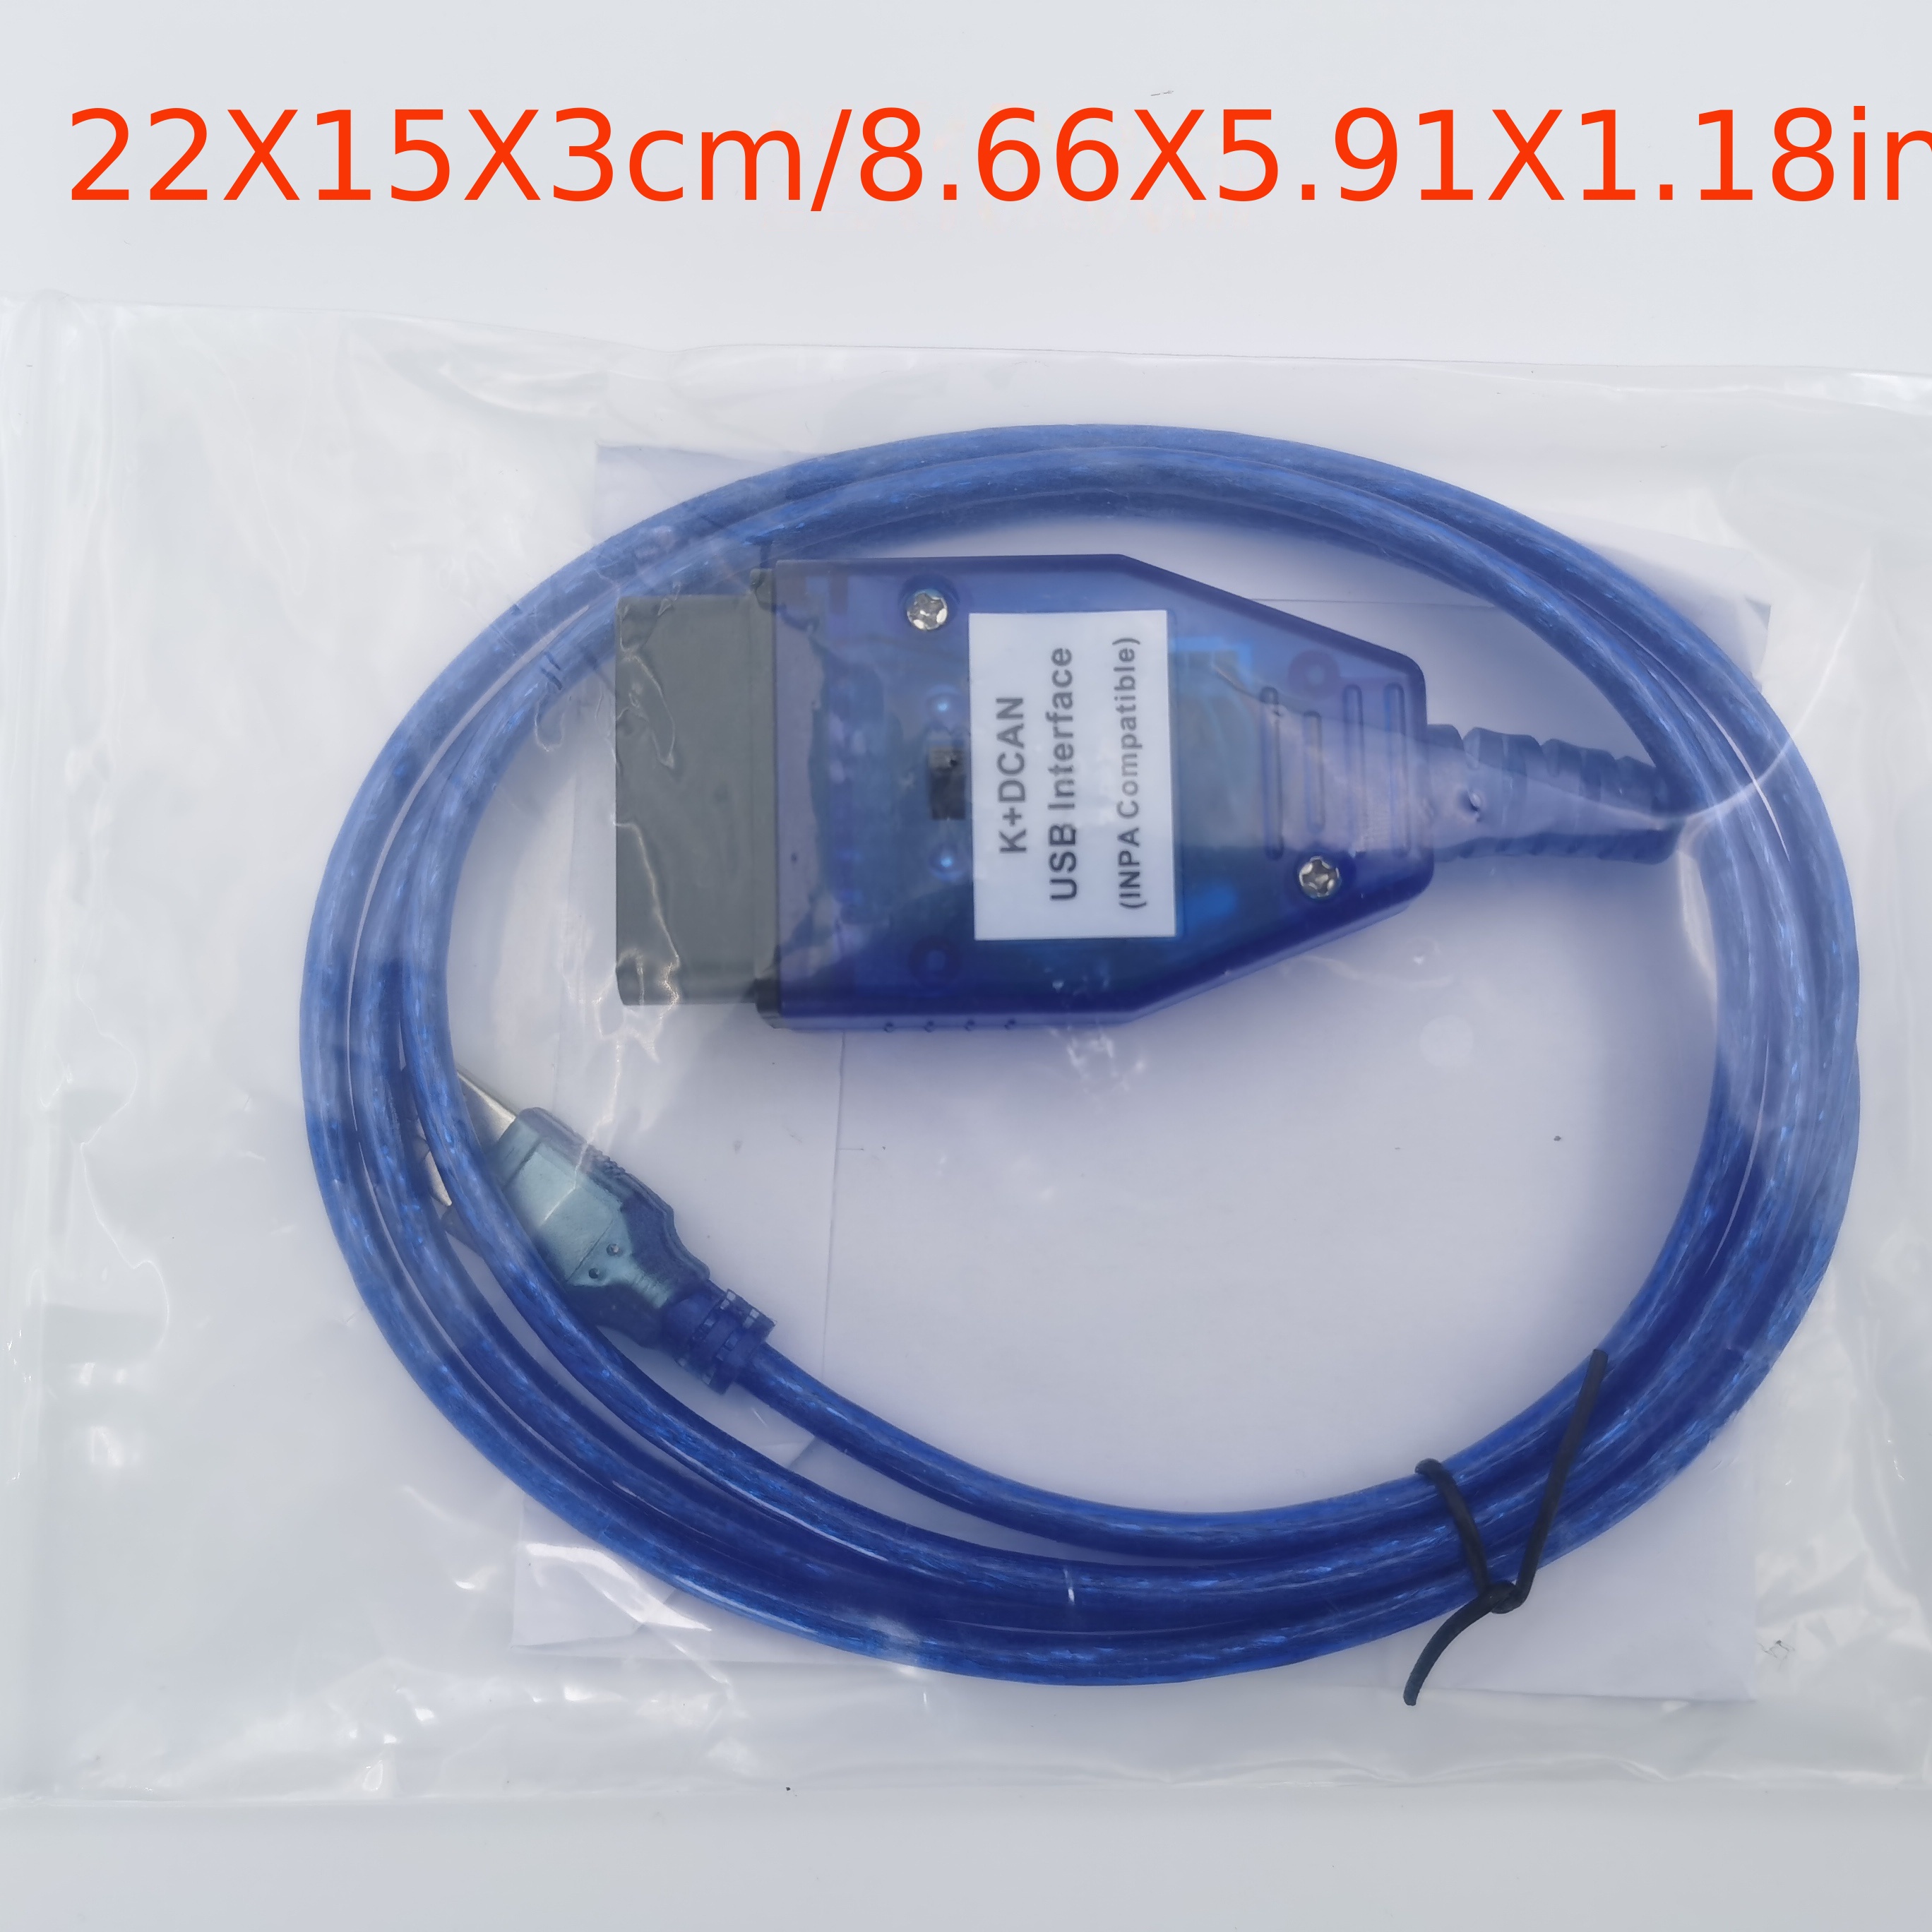 For Bmw Inpa New Usb Cables For Bmw K+dcan Usb Interface Diagnostic Tool  For Bmw E46 K+can K Can Ftdi Ft232 Chip Obd2 Scanner